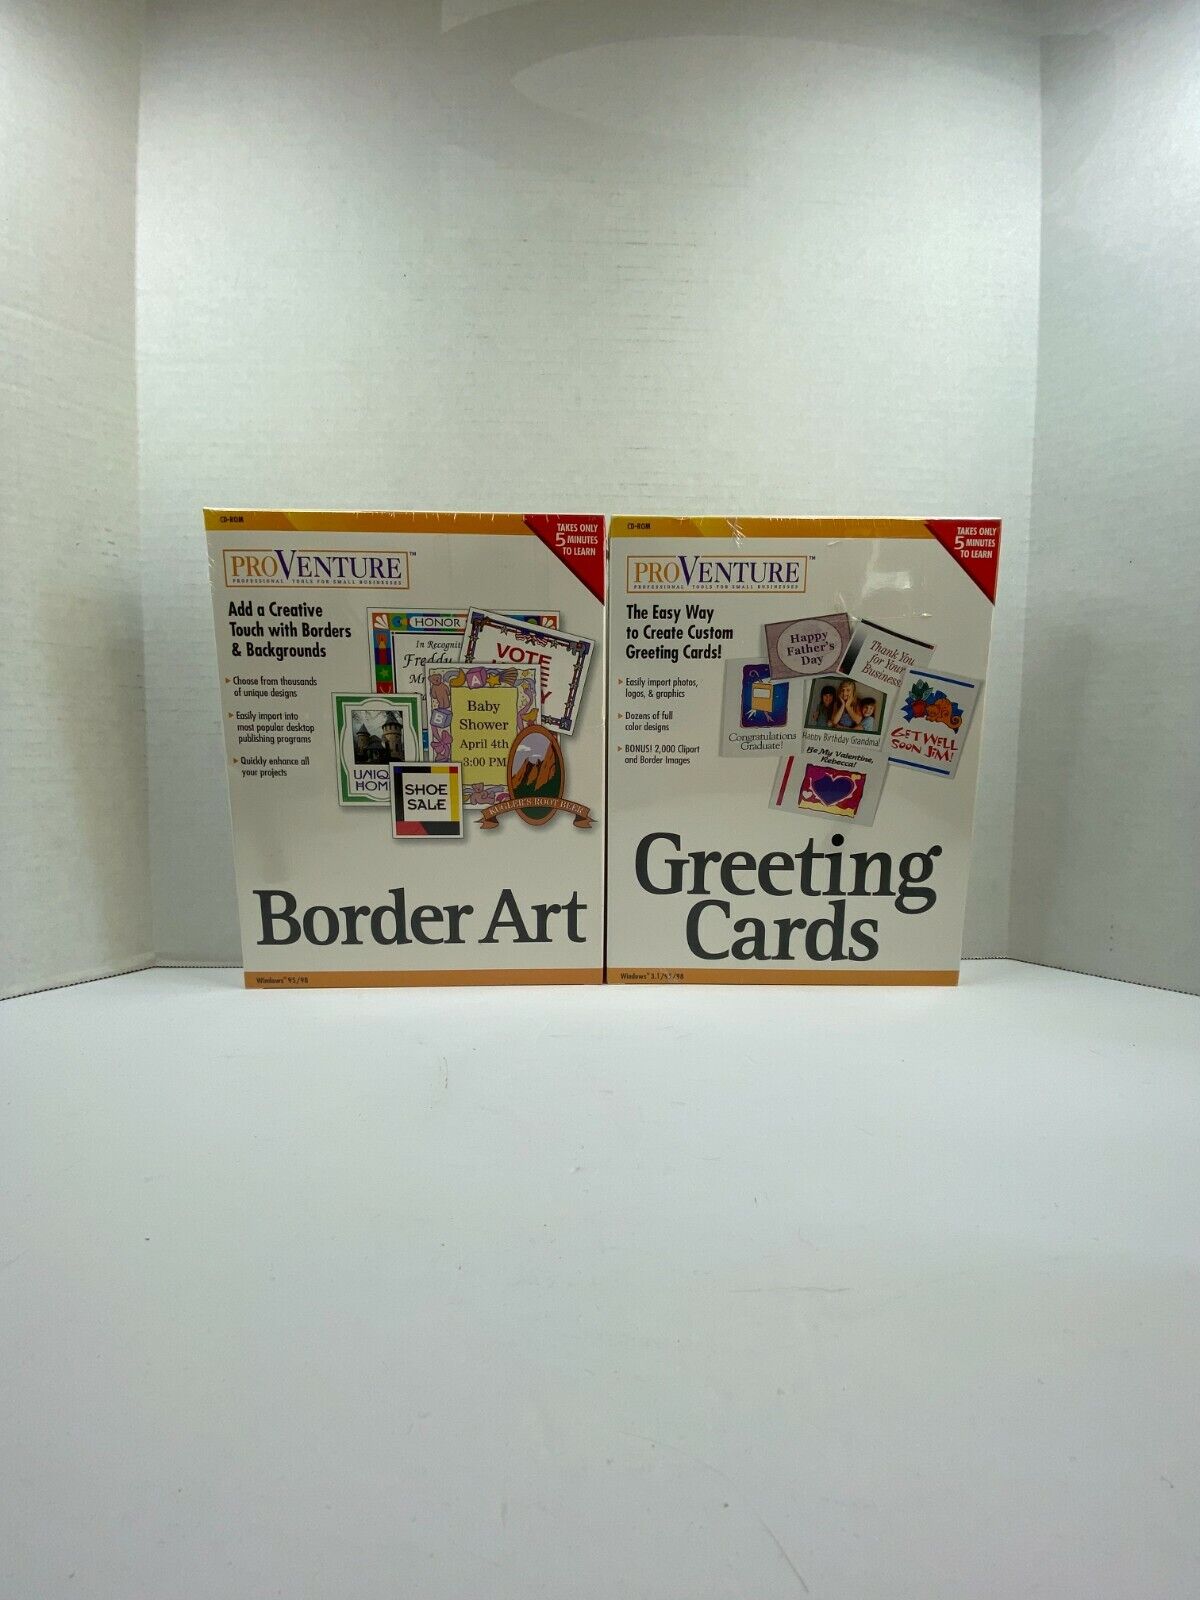 Pro Venture Border sold out Art Greeting Cards Windows 53 1999 95 Luxury goods 98